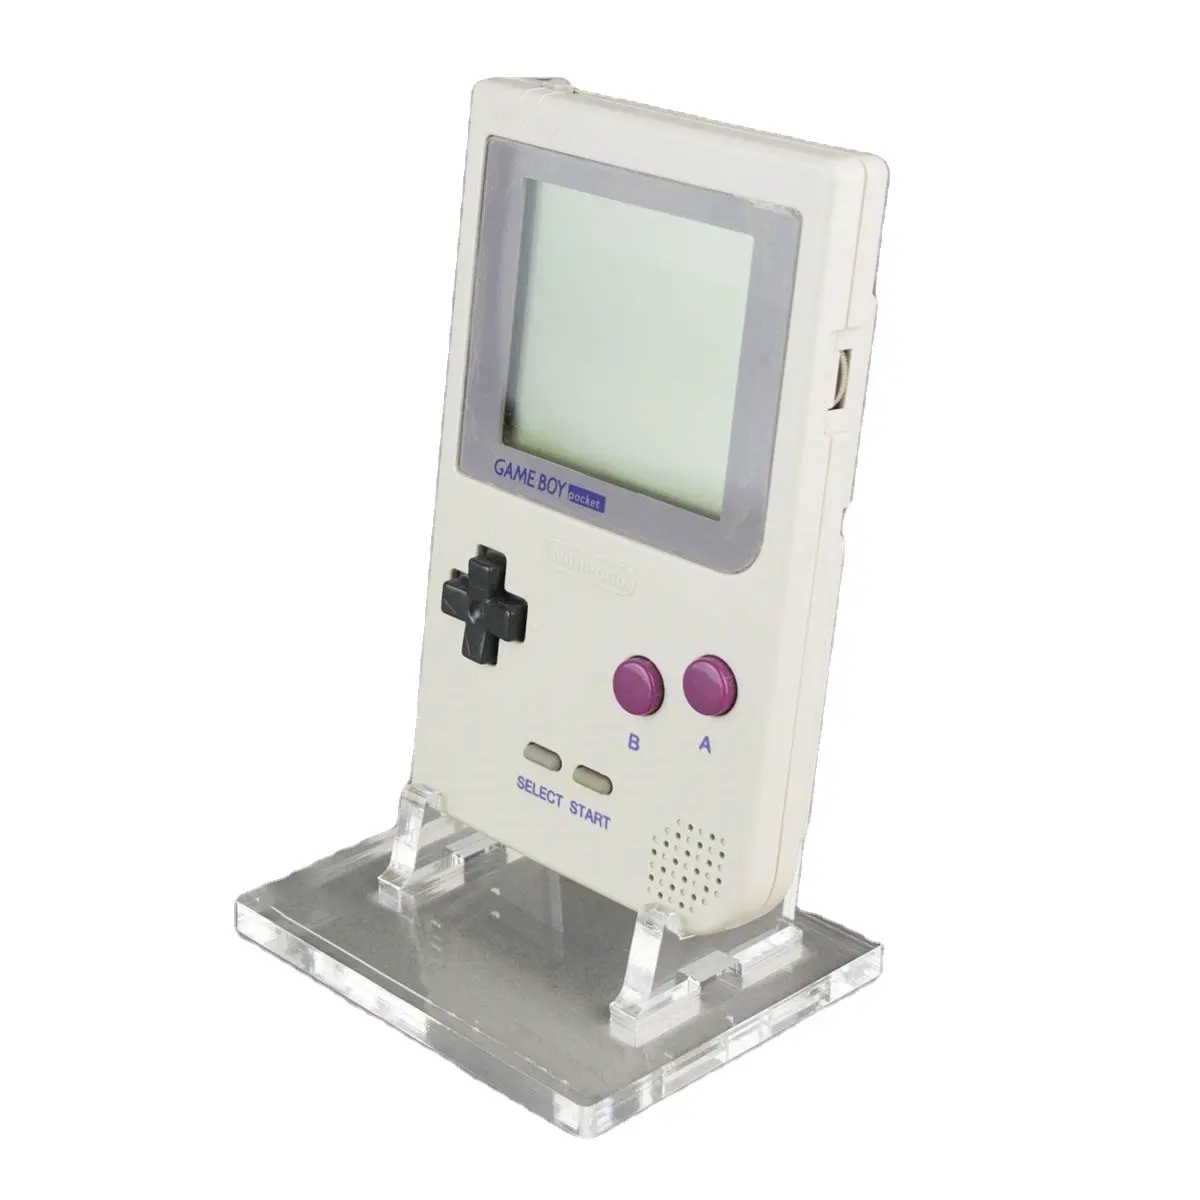 YAGELI custom clear lucite game boy pocket holder china acrylic display stands for products